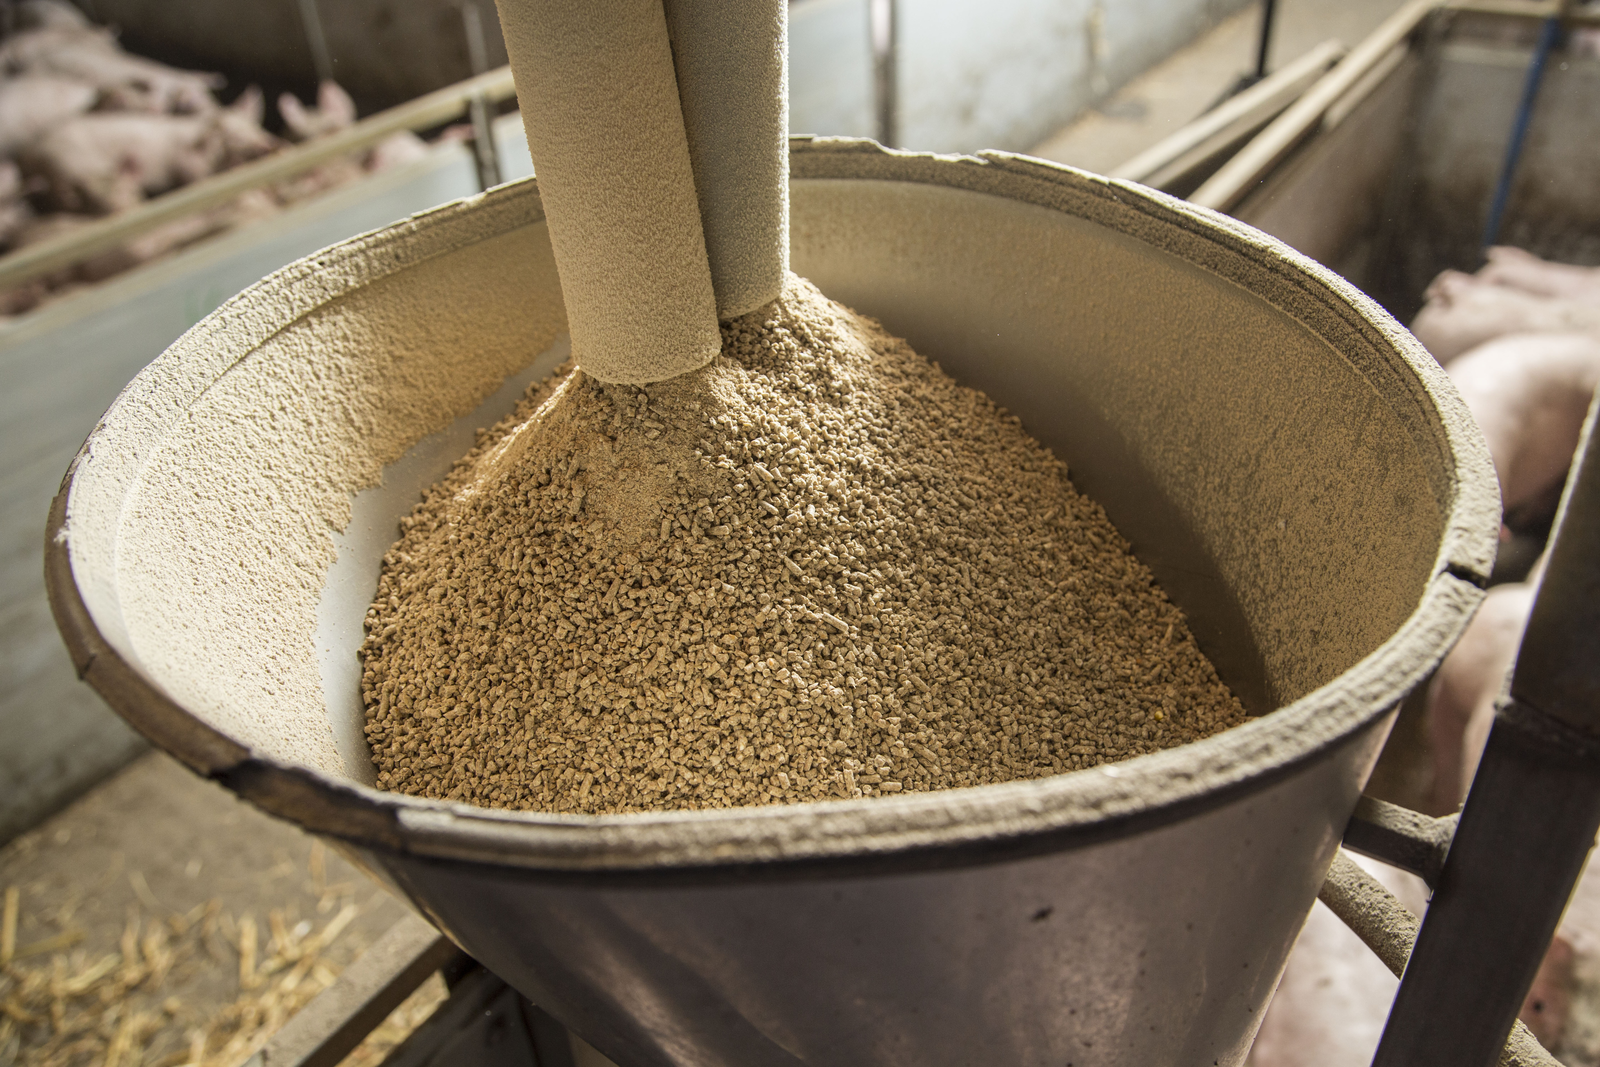 IFIF welcomes closer cooperation of feed sector